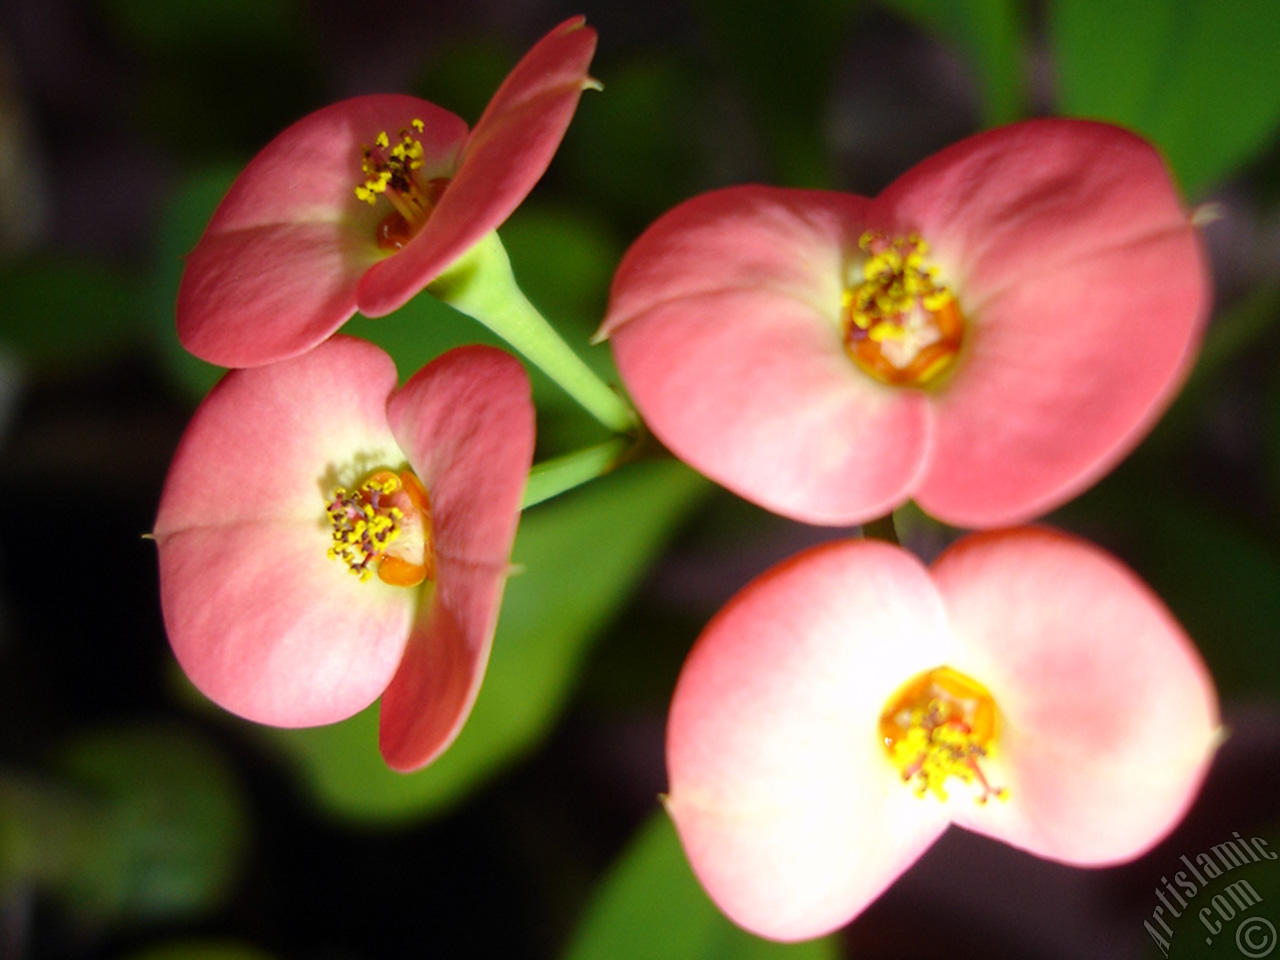 Euphorbia Milii -Crown of thorns- with pink flower.
